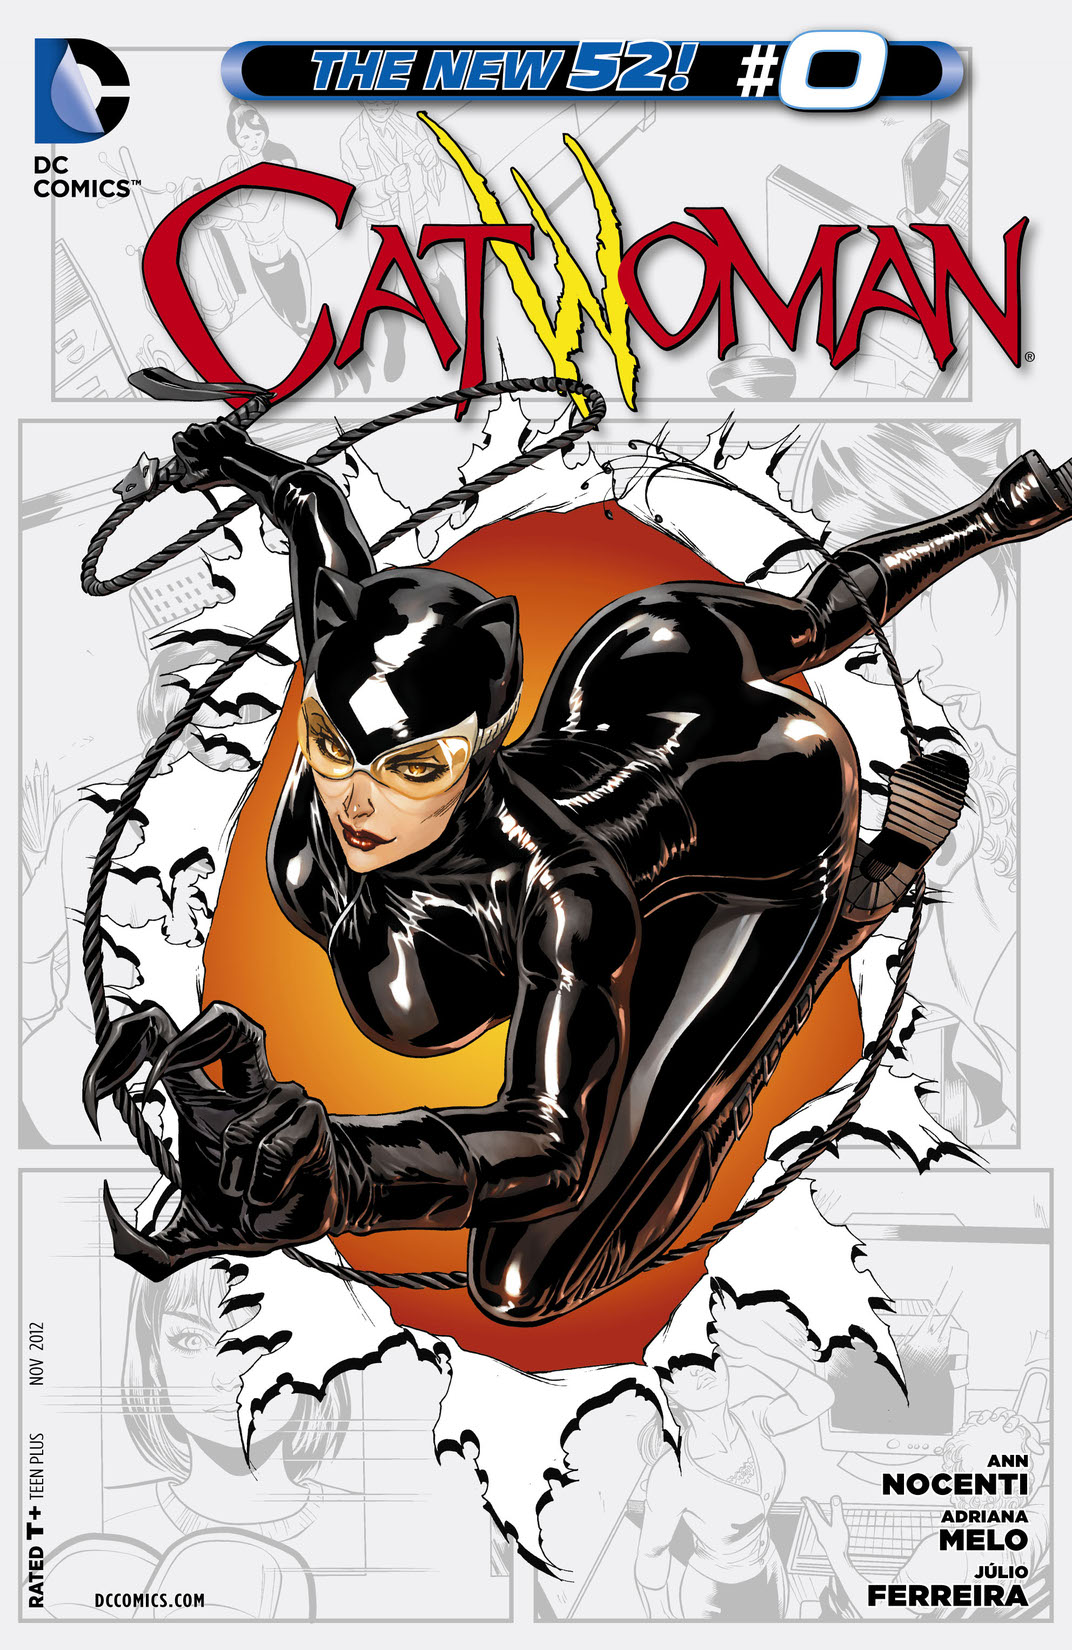 Catwoman (2011-) #0 preview images